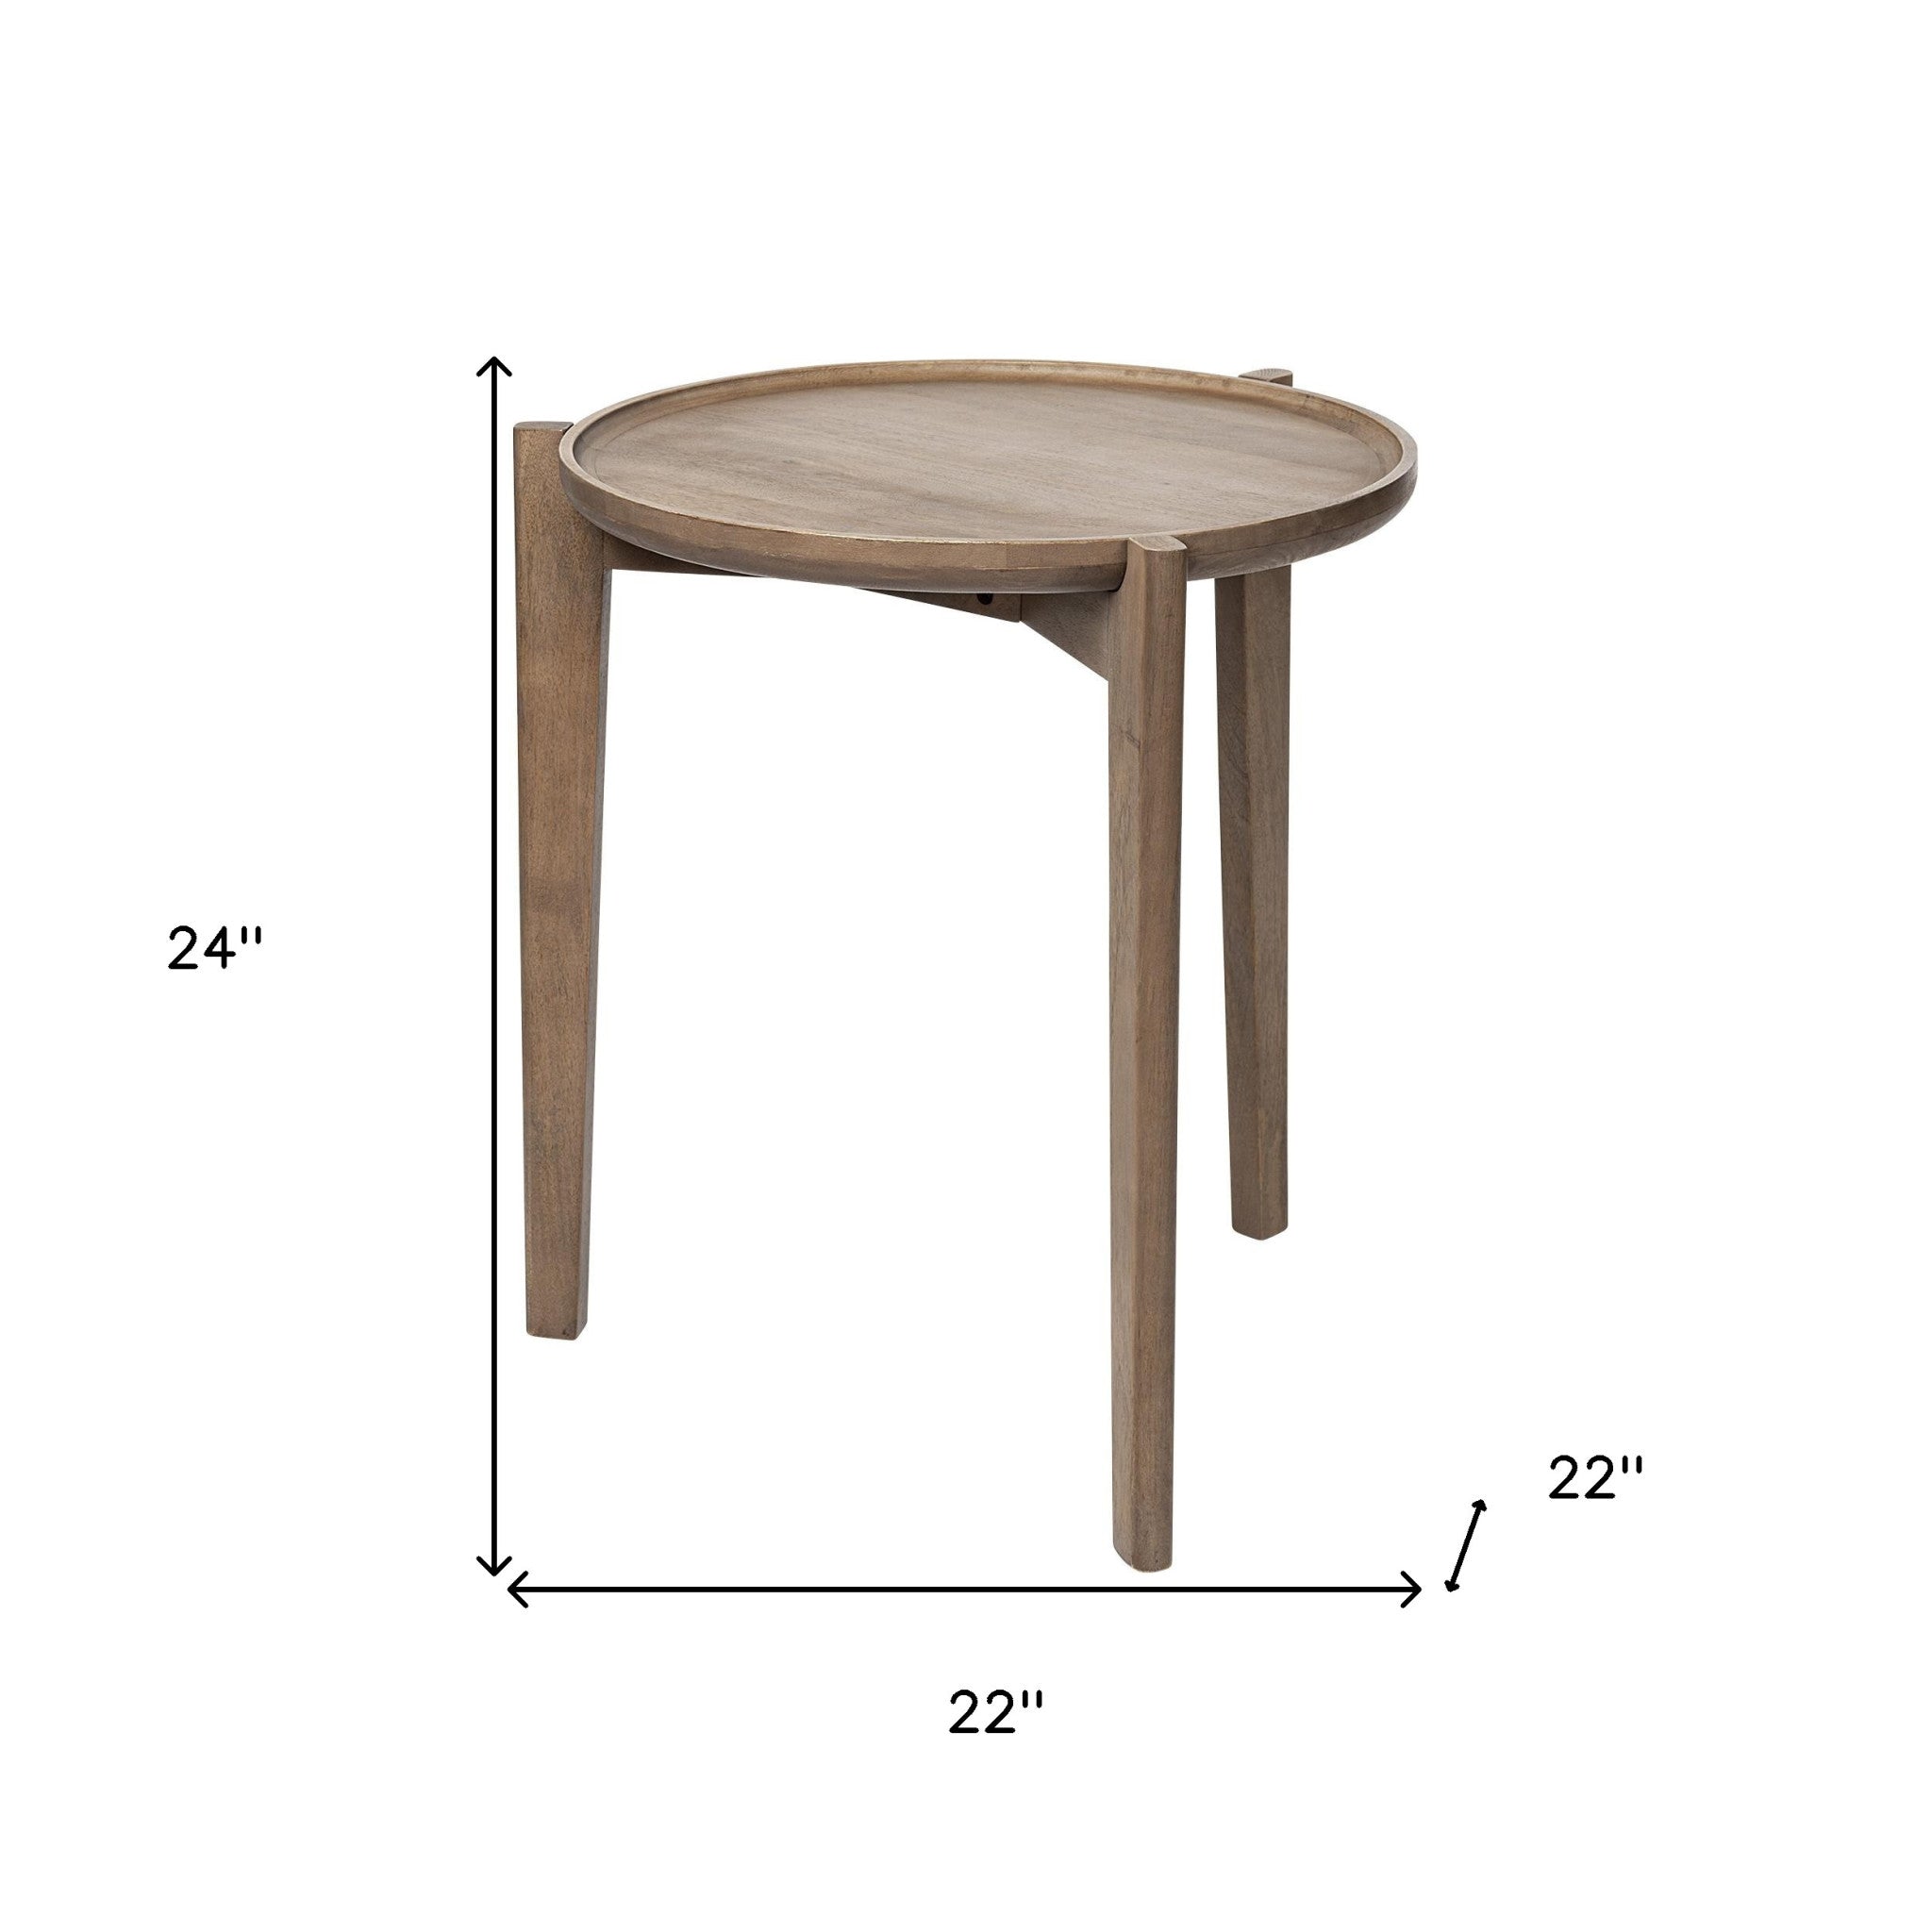 Brown Wood Round Top Accent Table With Three-Legged Base